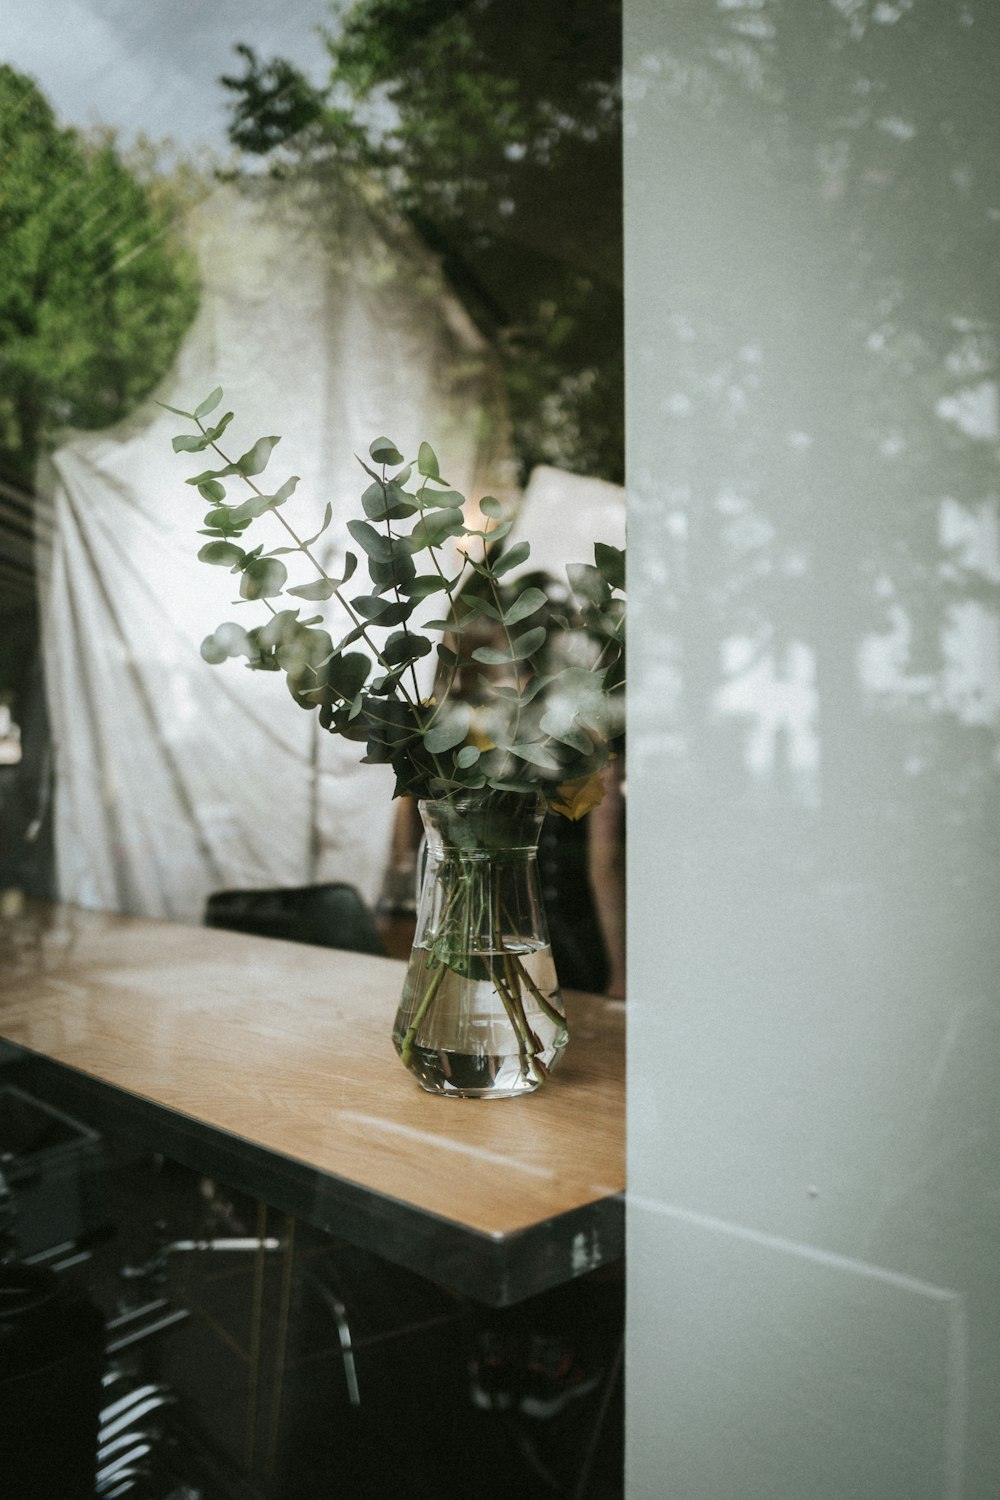 green leaf plant in clear glass vase on wooden surface